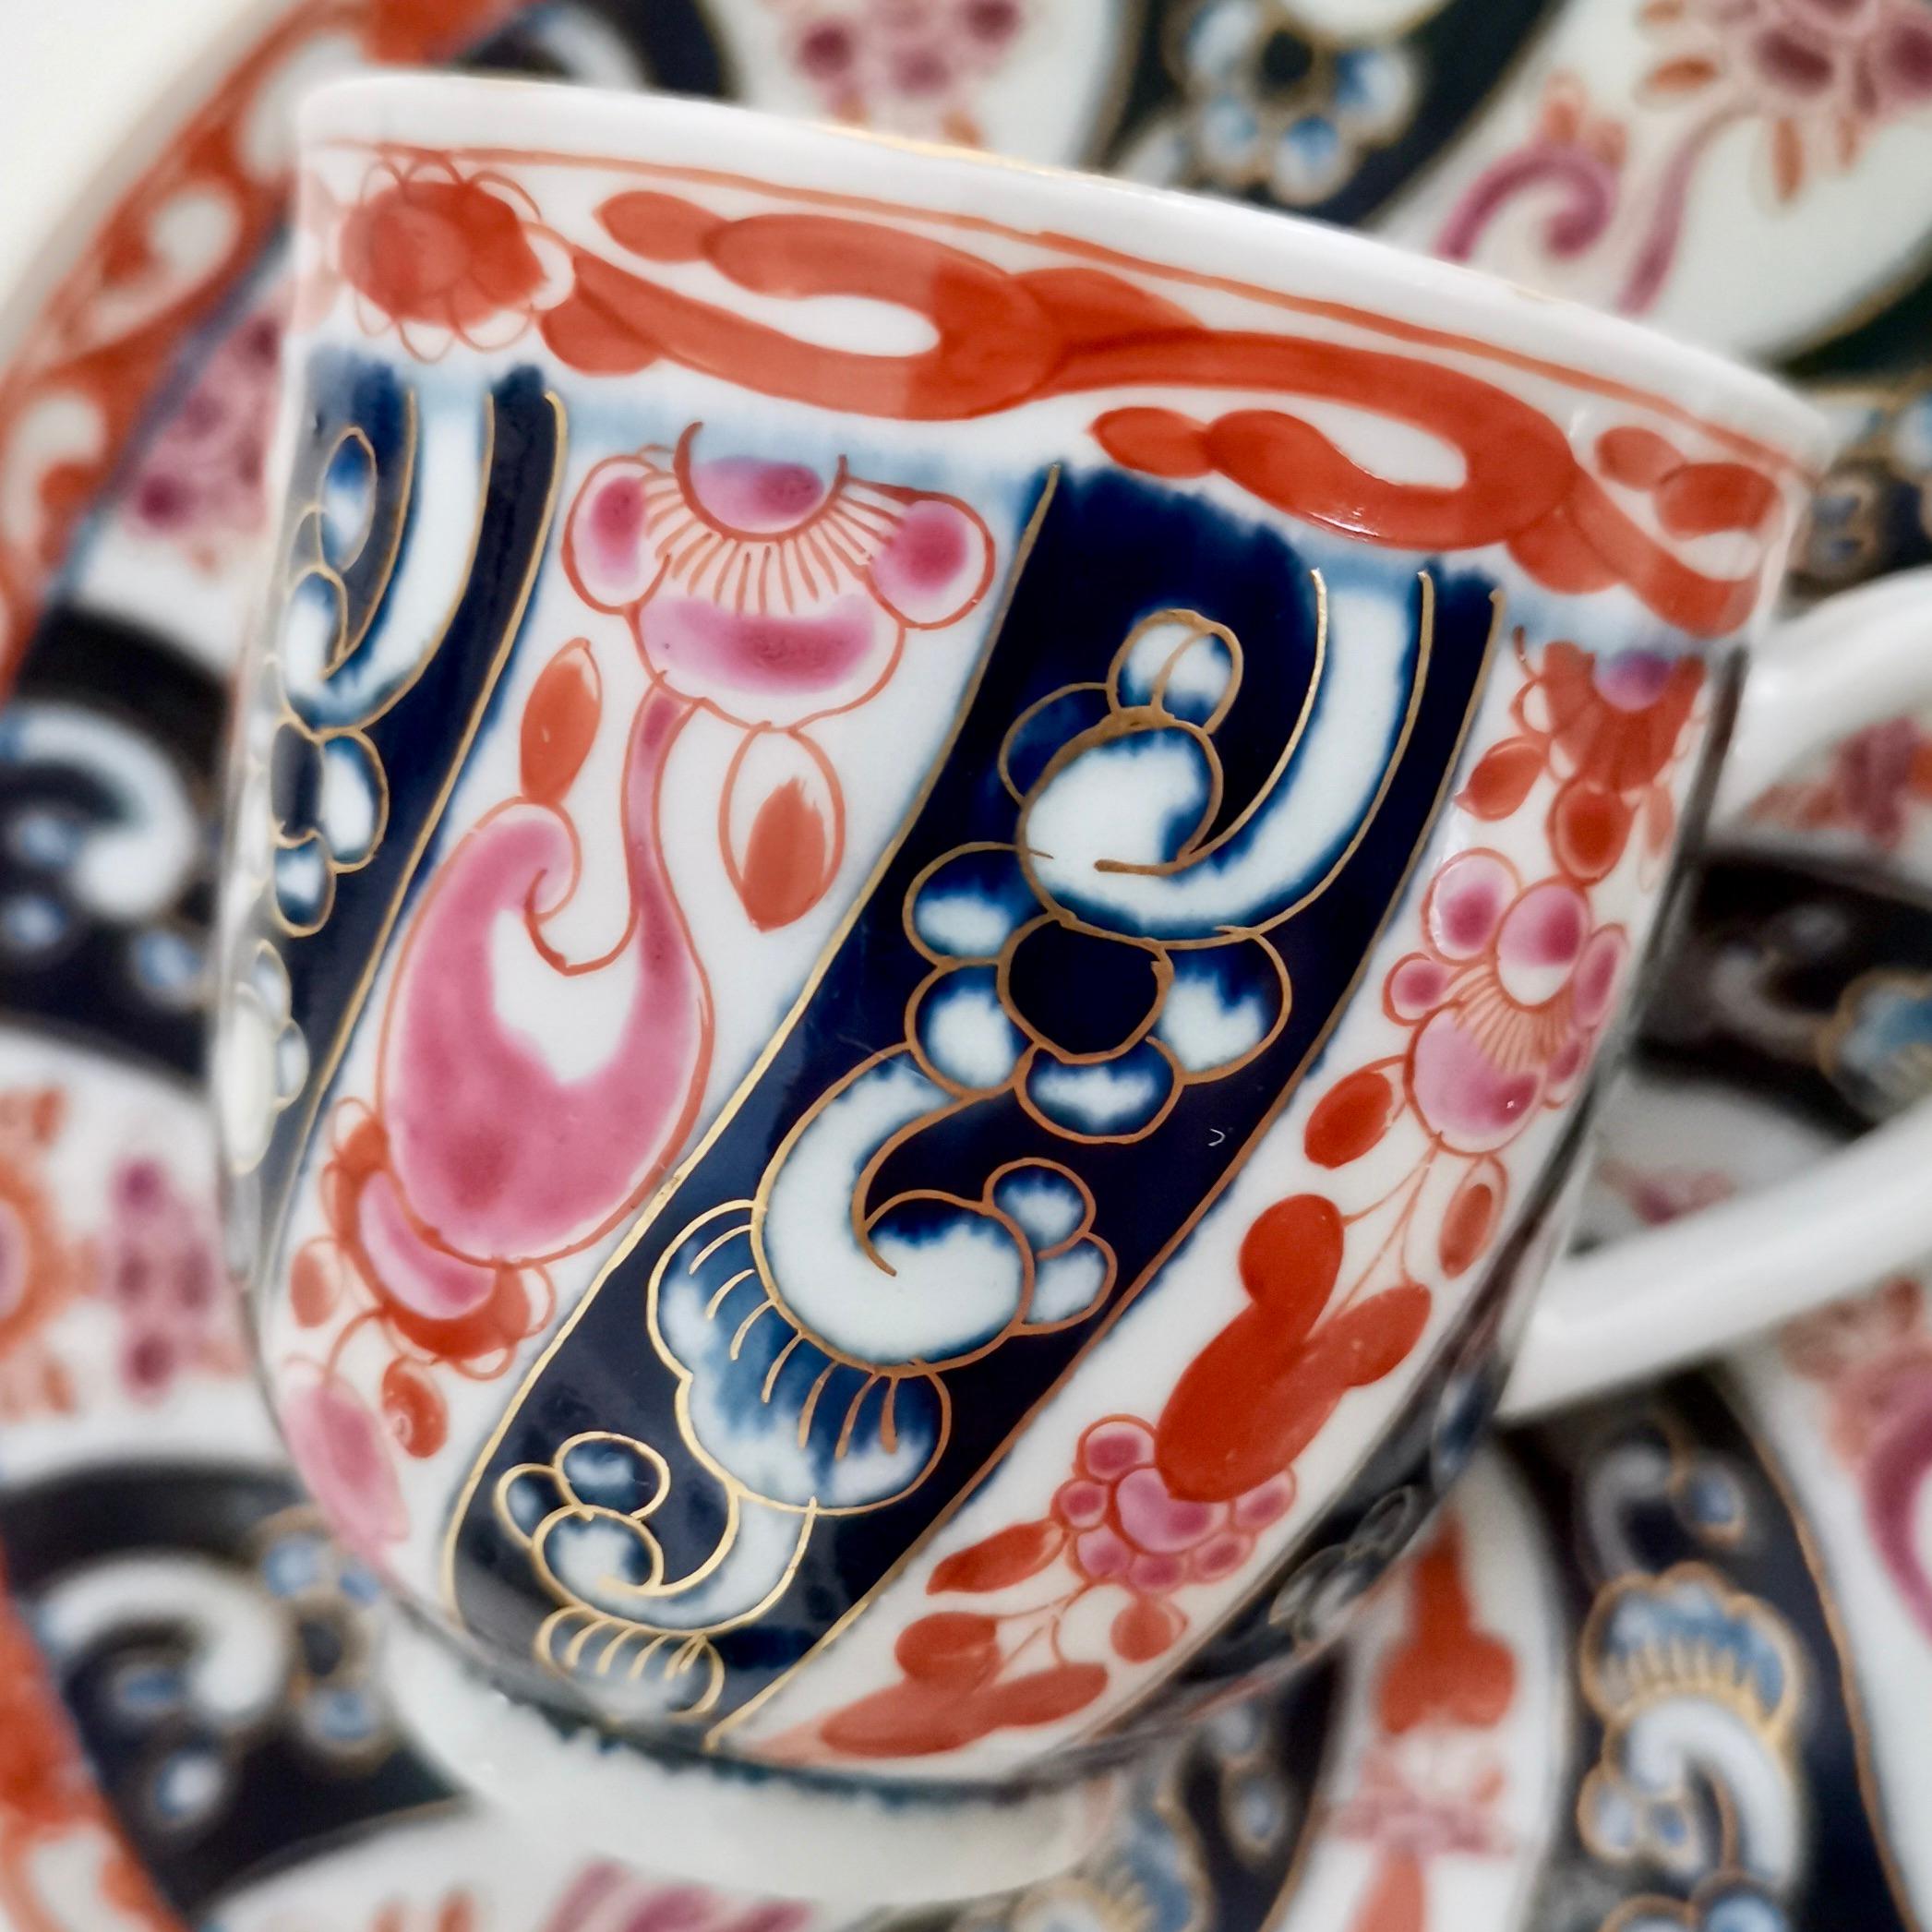 English Worcester Porcelain Coffee Cup, Queen Charlotte Pattern, Red and Blue, ca 1770